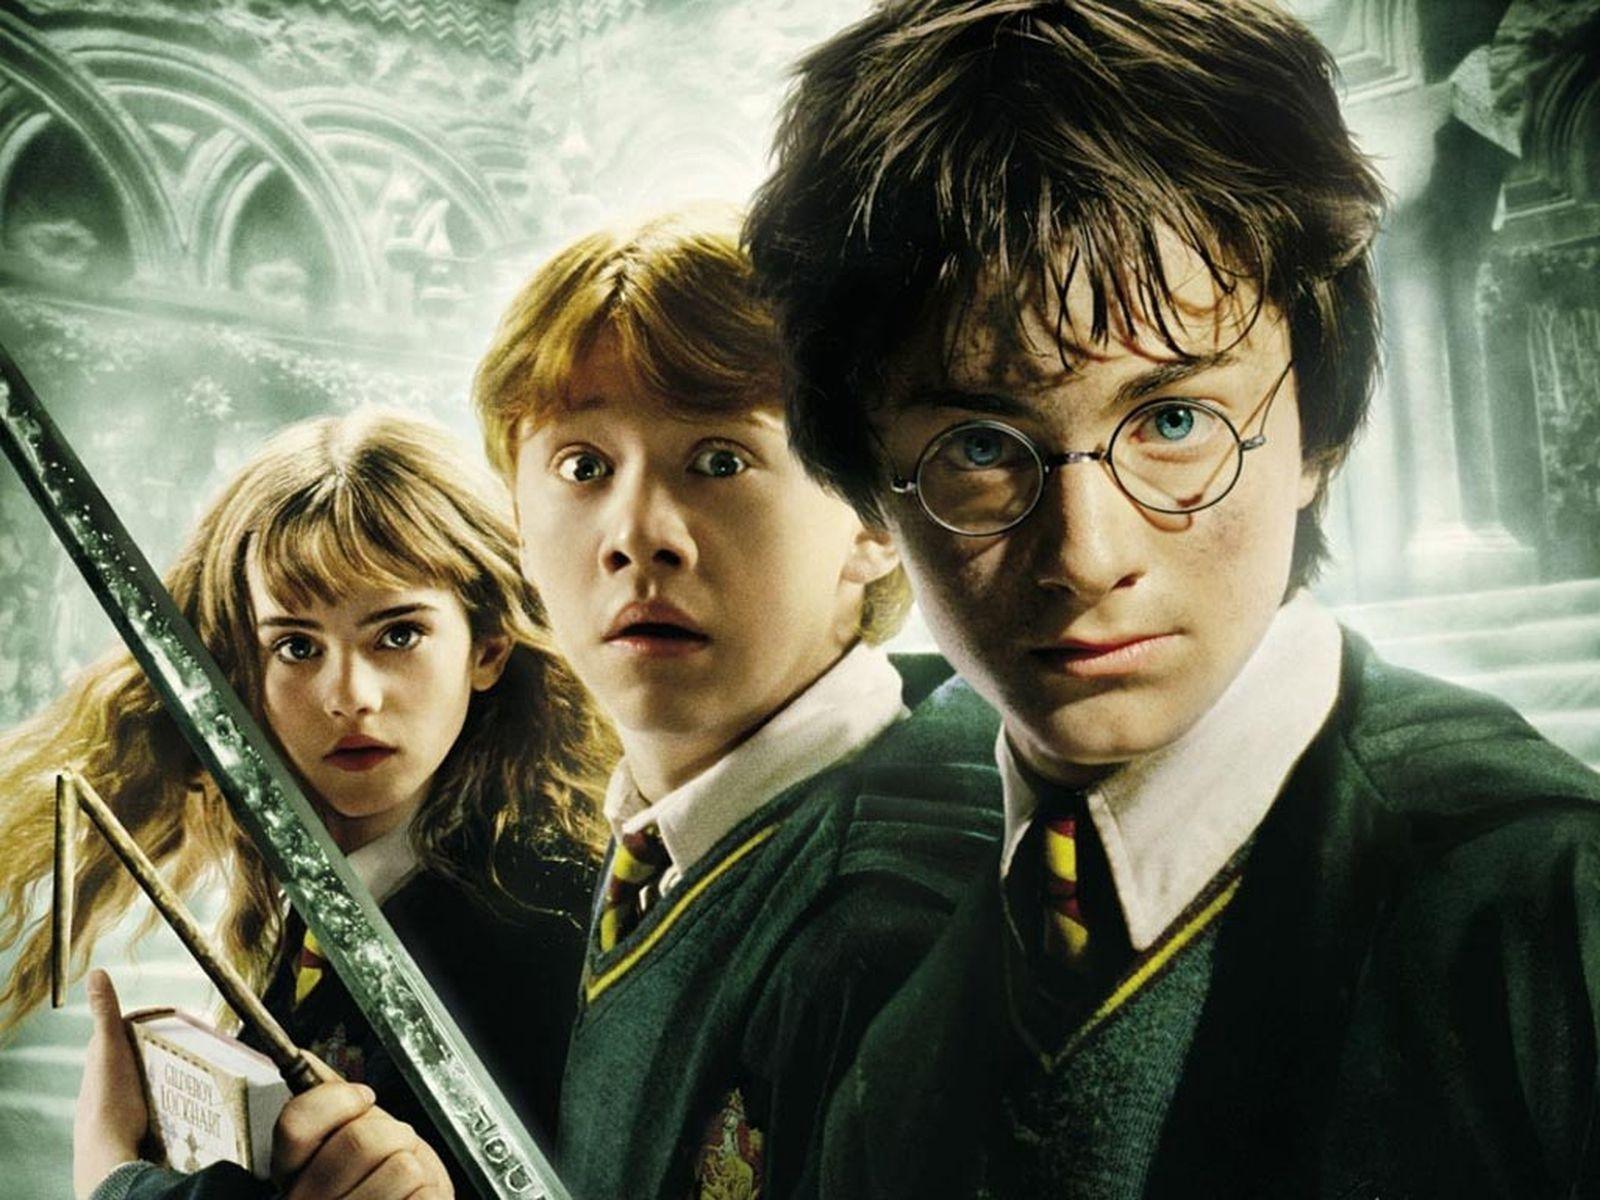 Download wallpaper 1600x1200 harry potter and the chamber of secrets